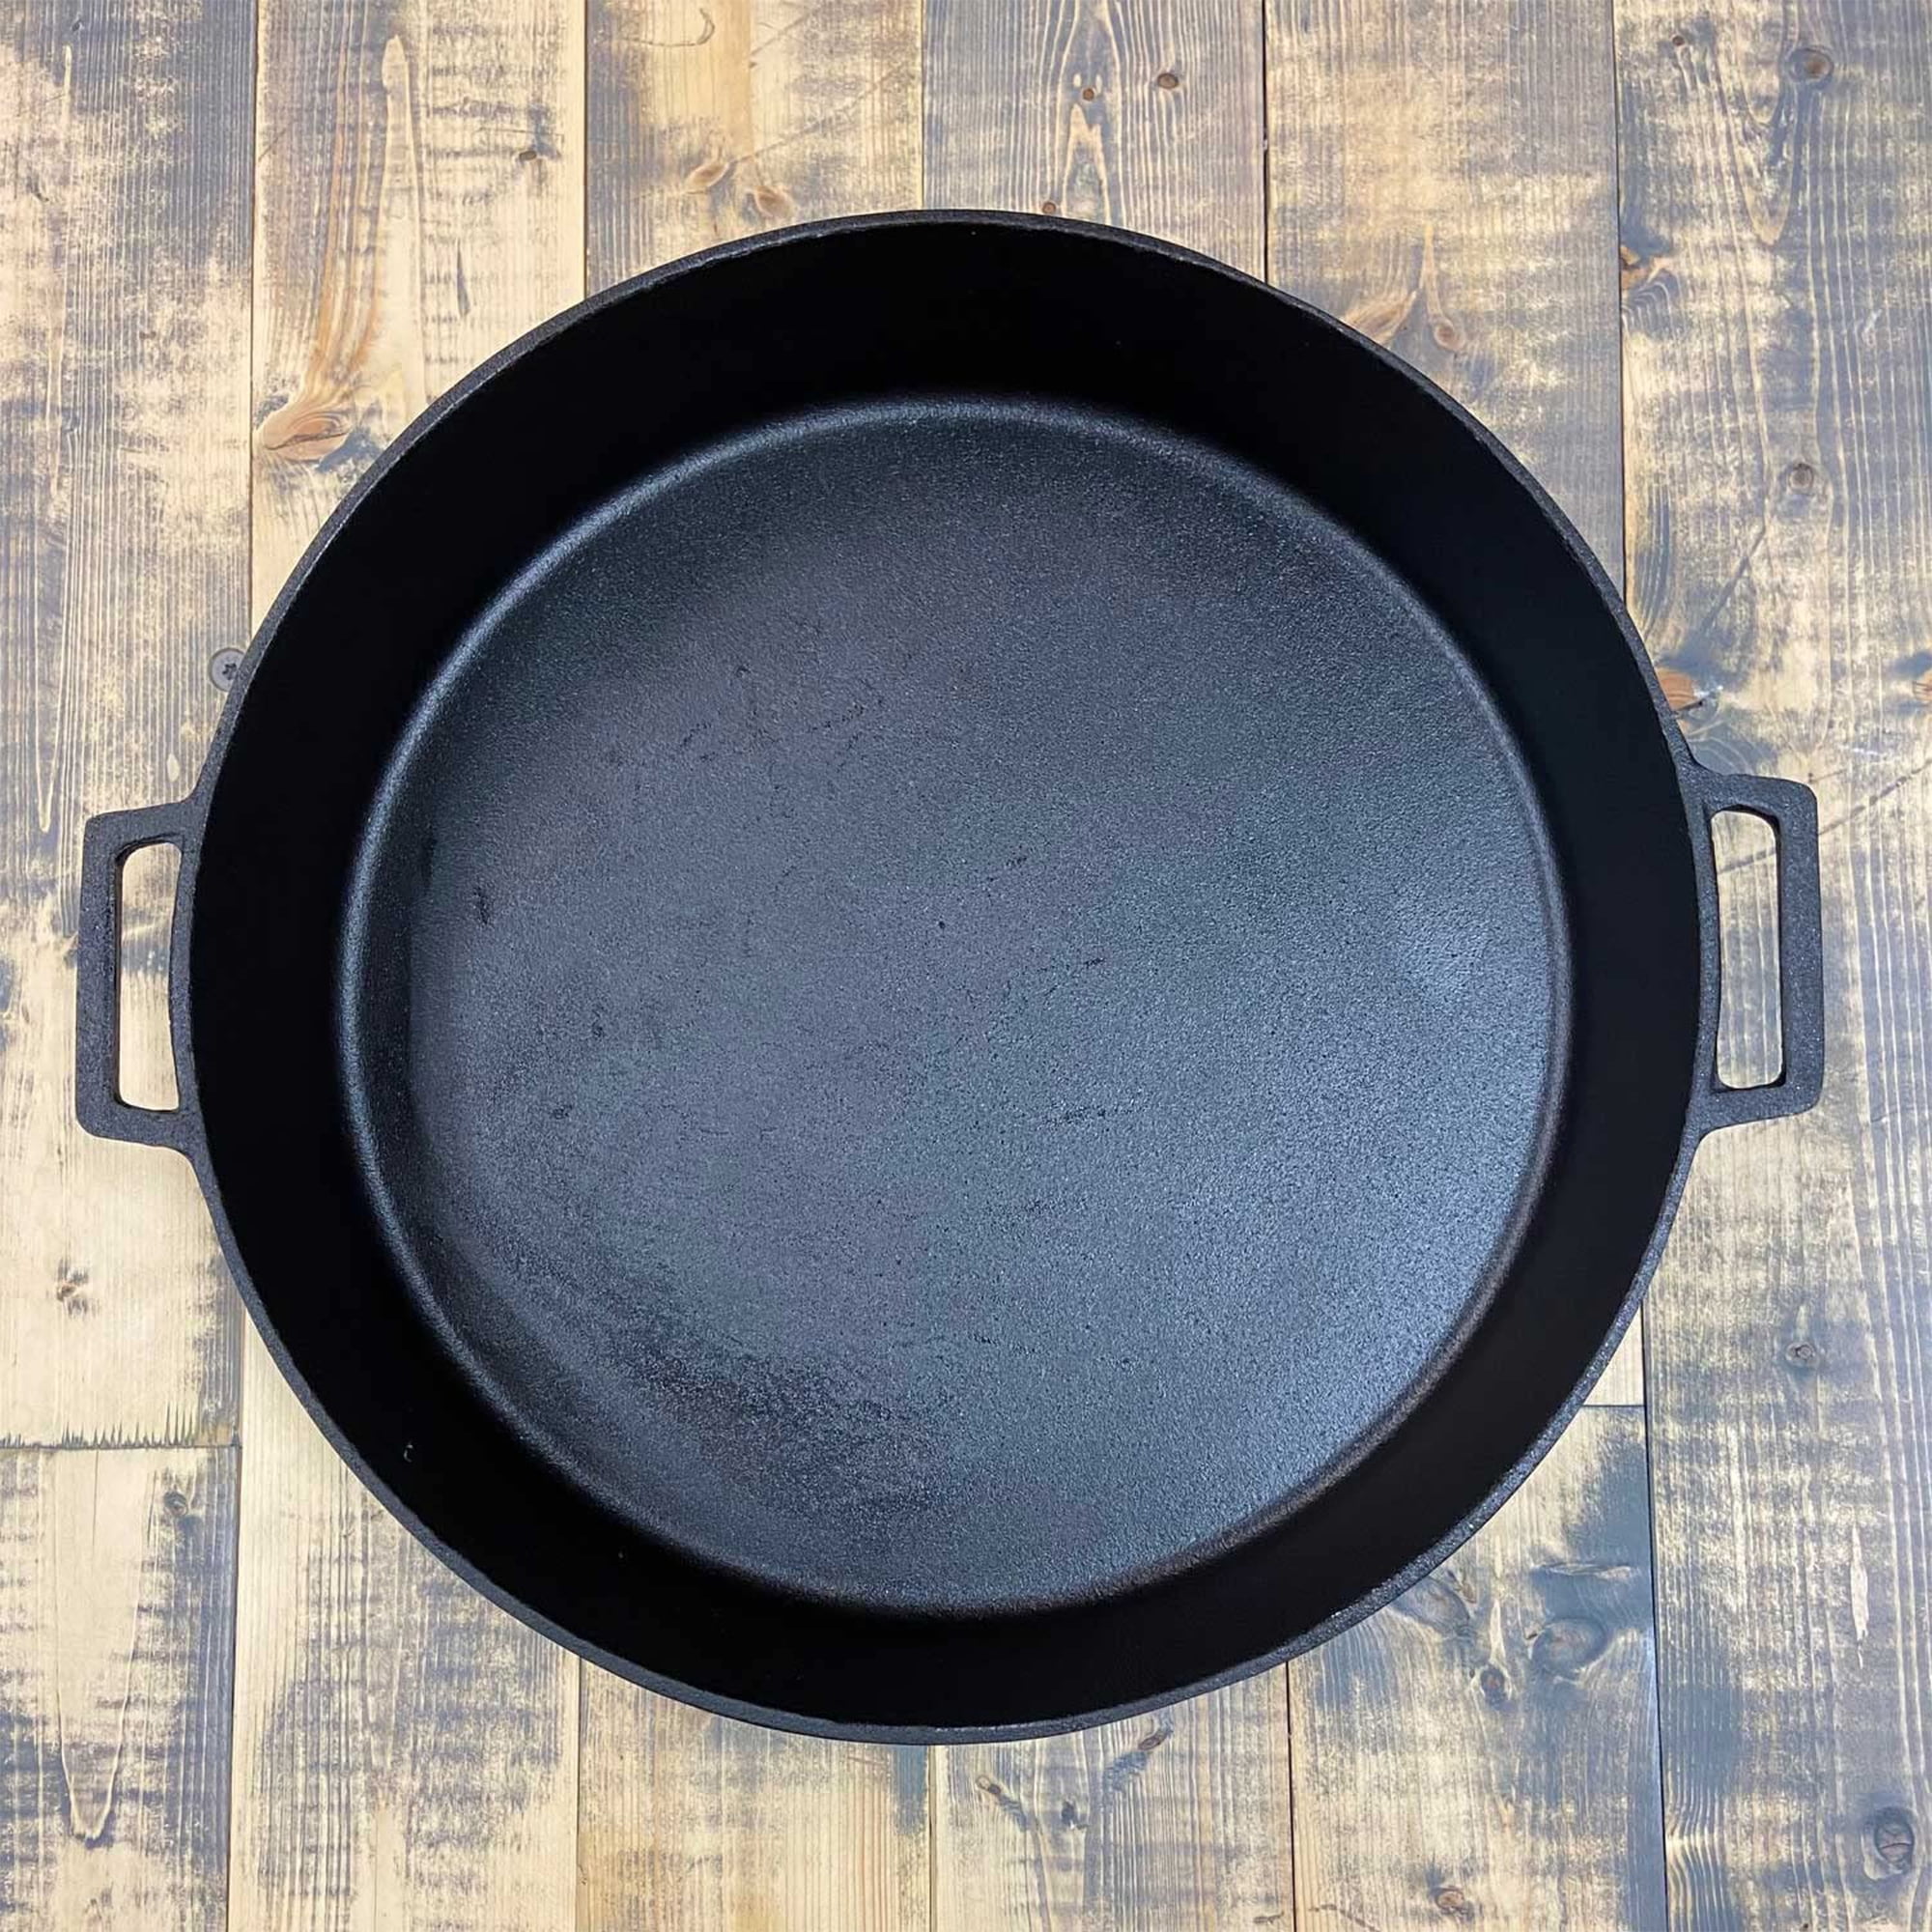 Bayou Classic Cast Iron Skillet, 20 In.